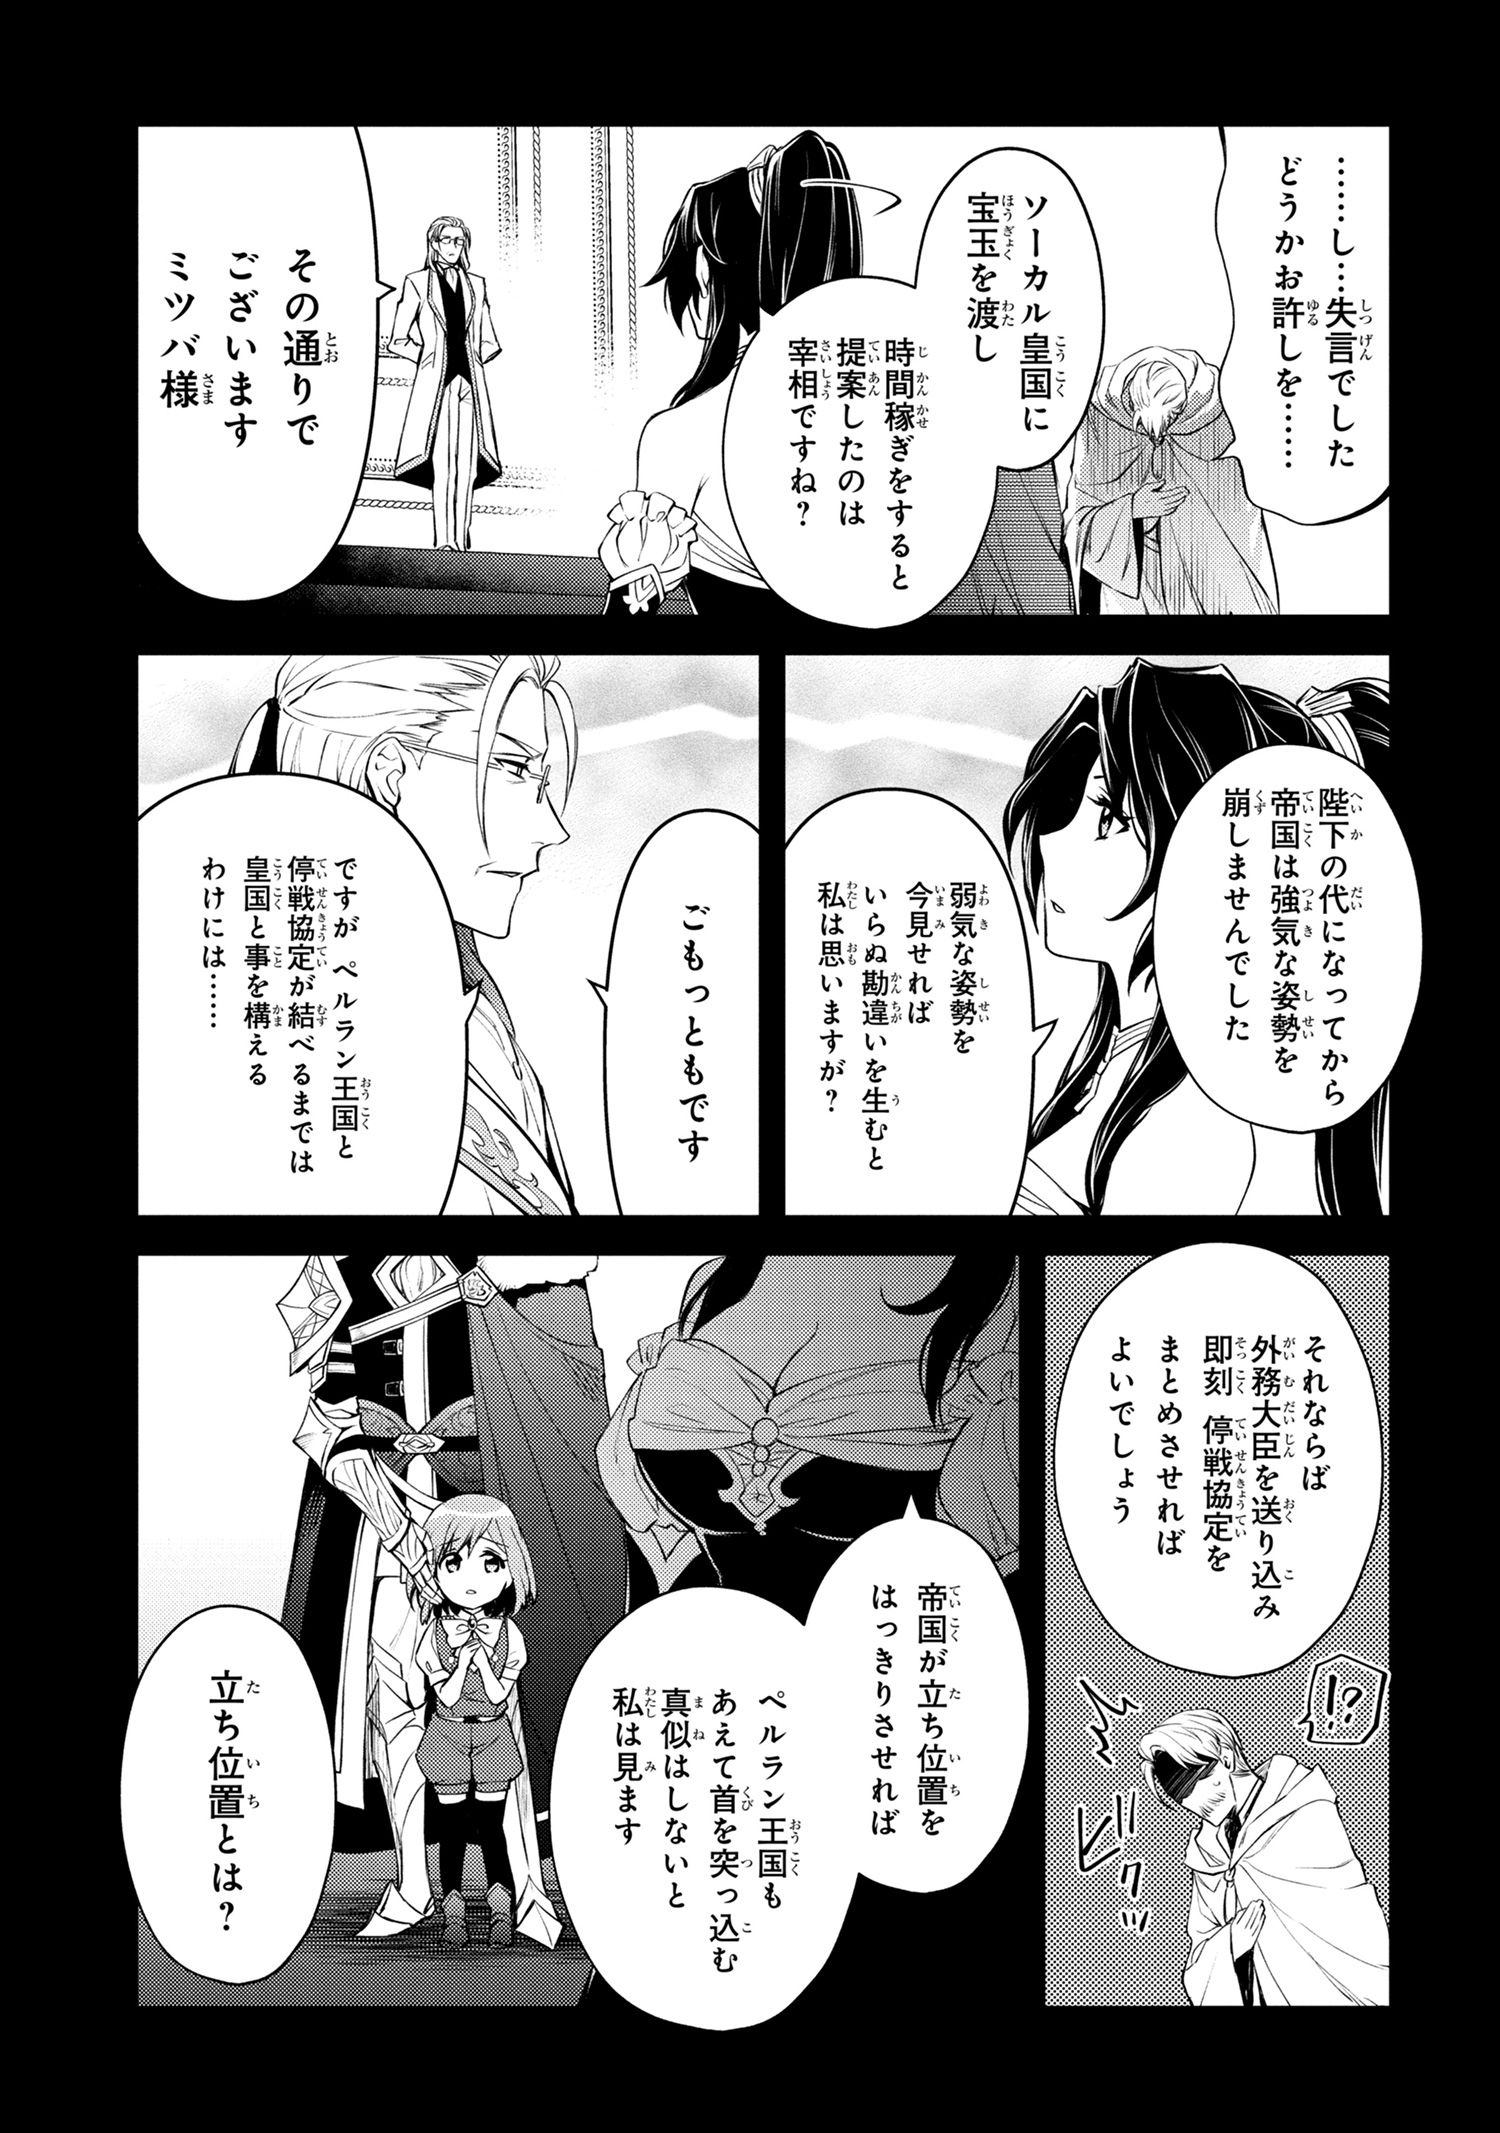 The Strongest Dull Prince’s Secret Battle for the Throne - Chapter 40.1 - Page 5